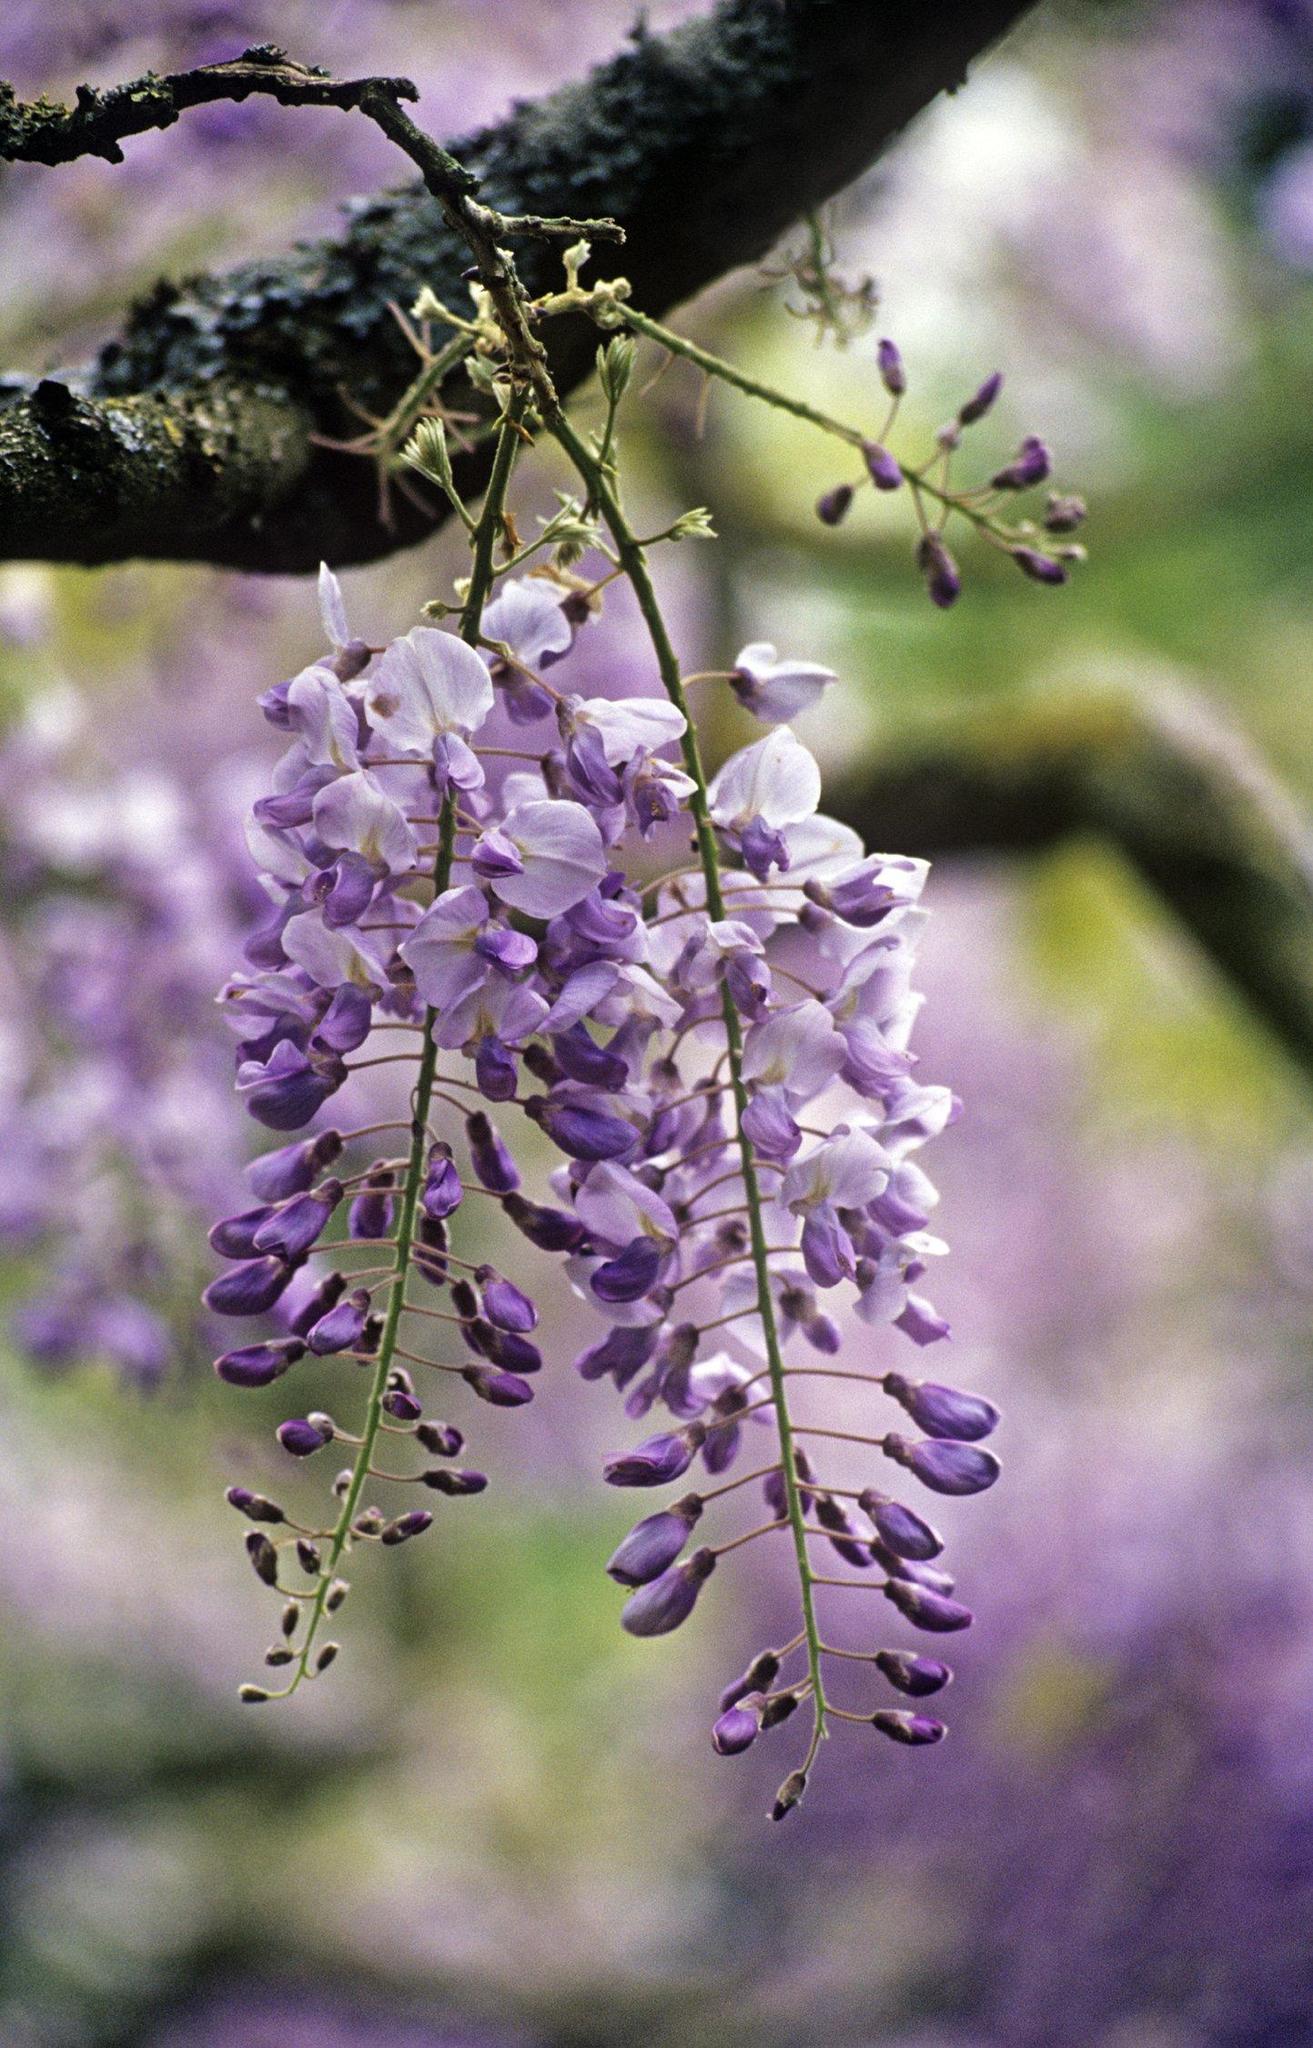 Gardening: Should you fertilize wisteria to help it bloom? - The ...